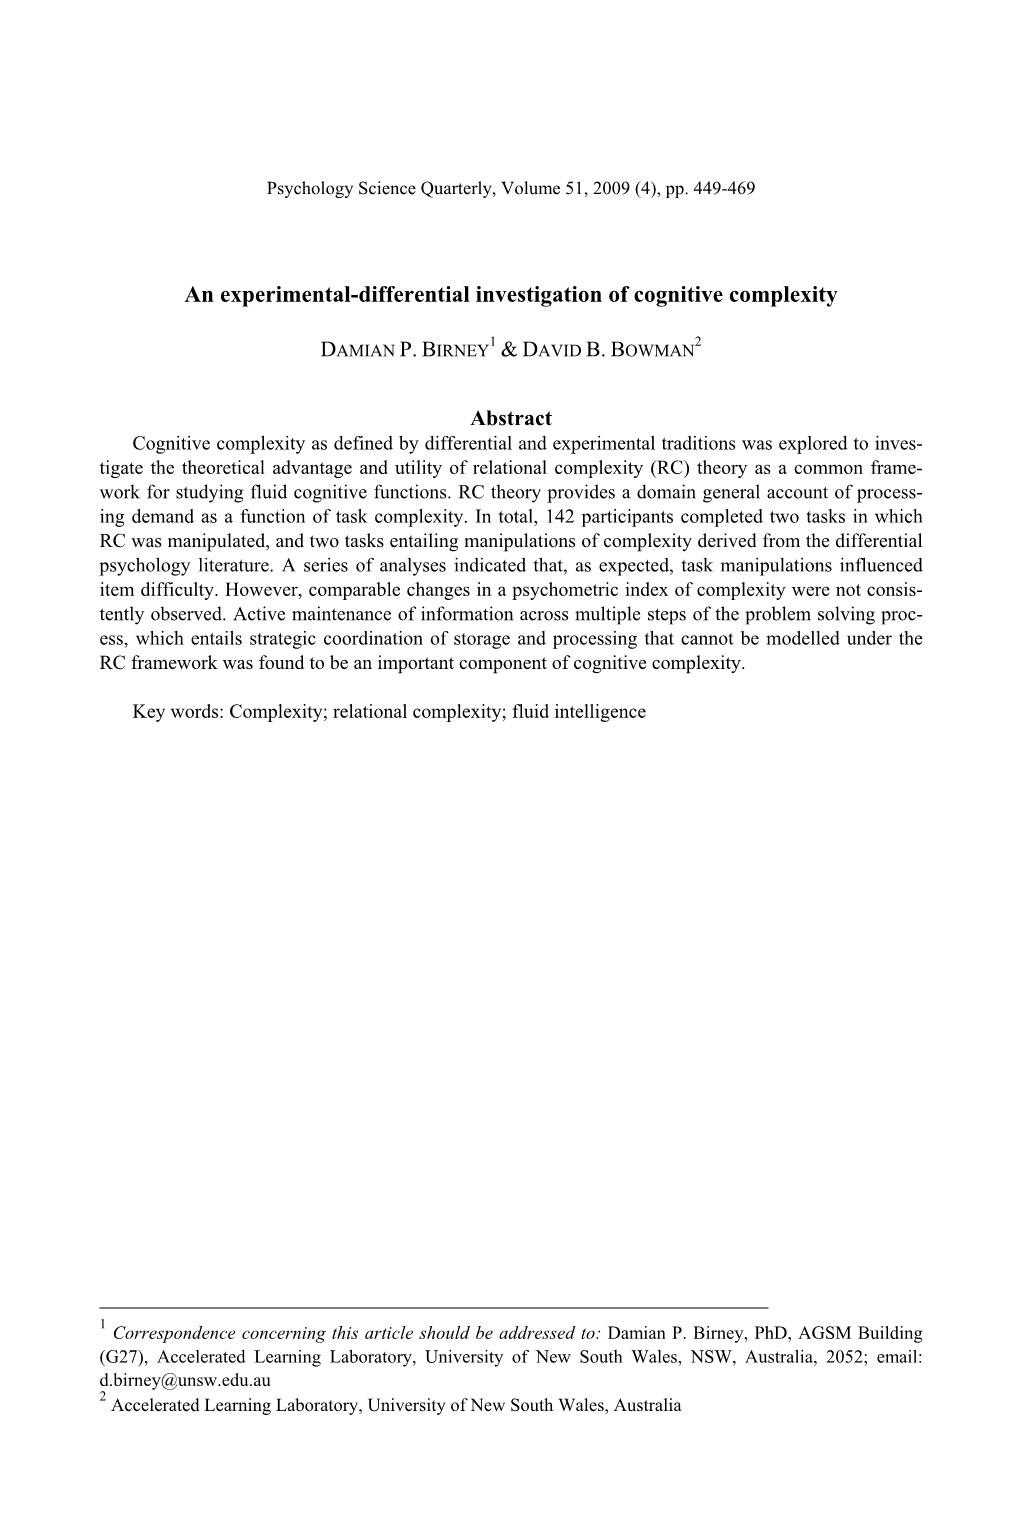 An Experimental-Differential Investigation of Cognitive Complexity